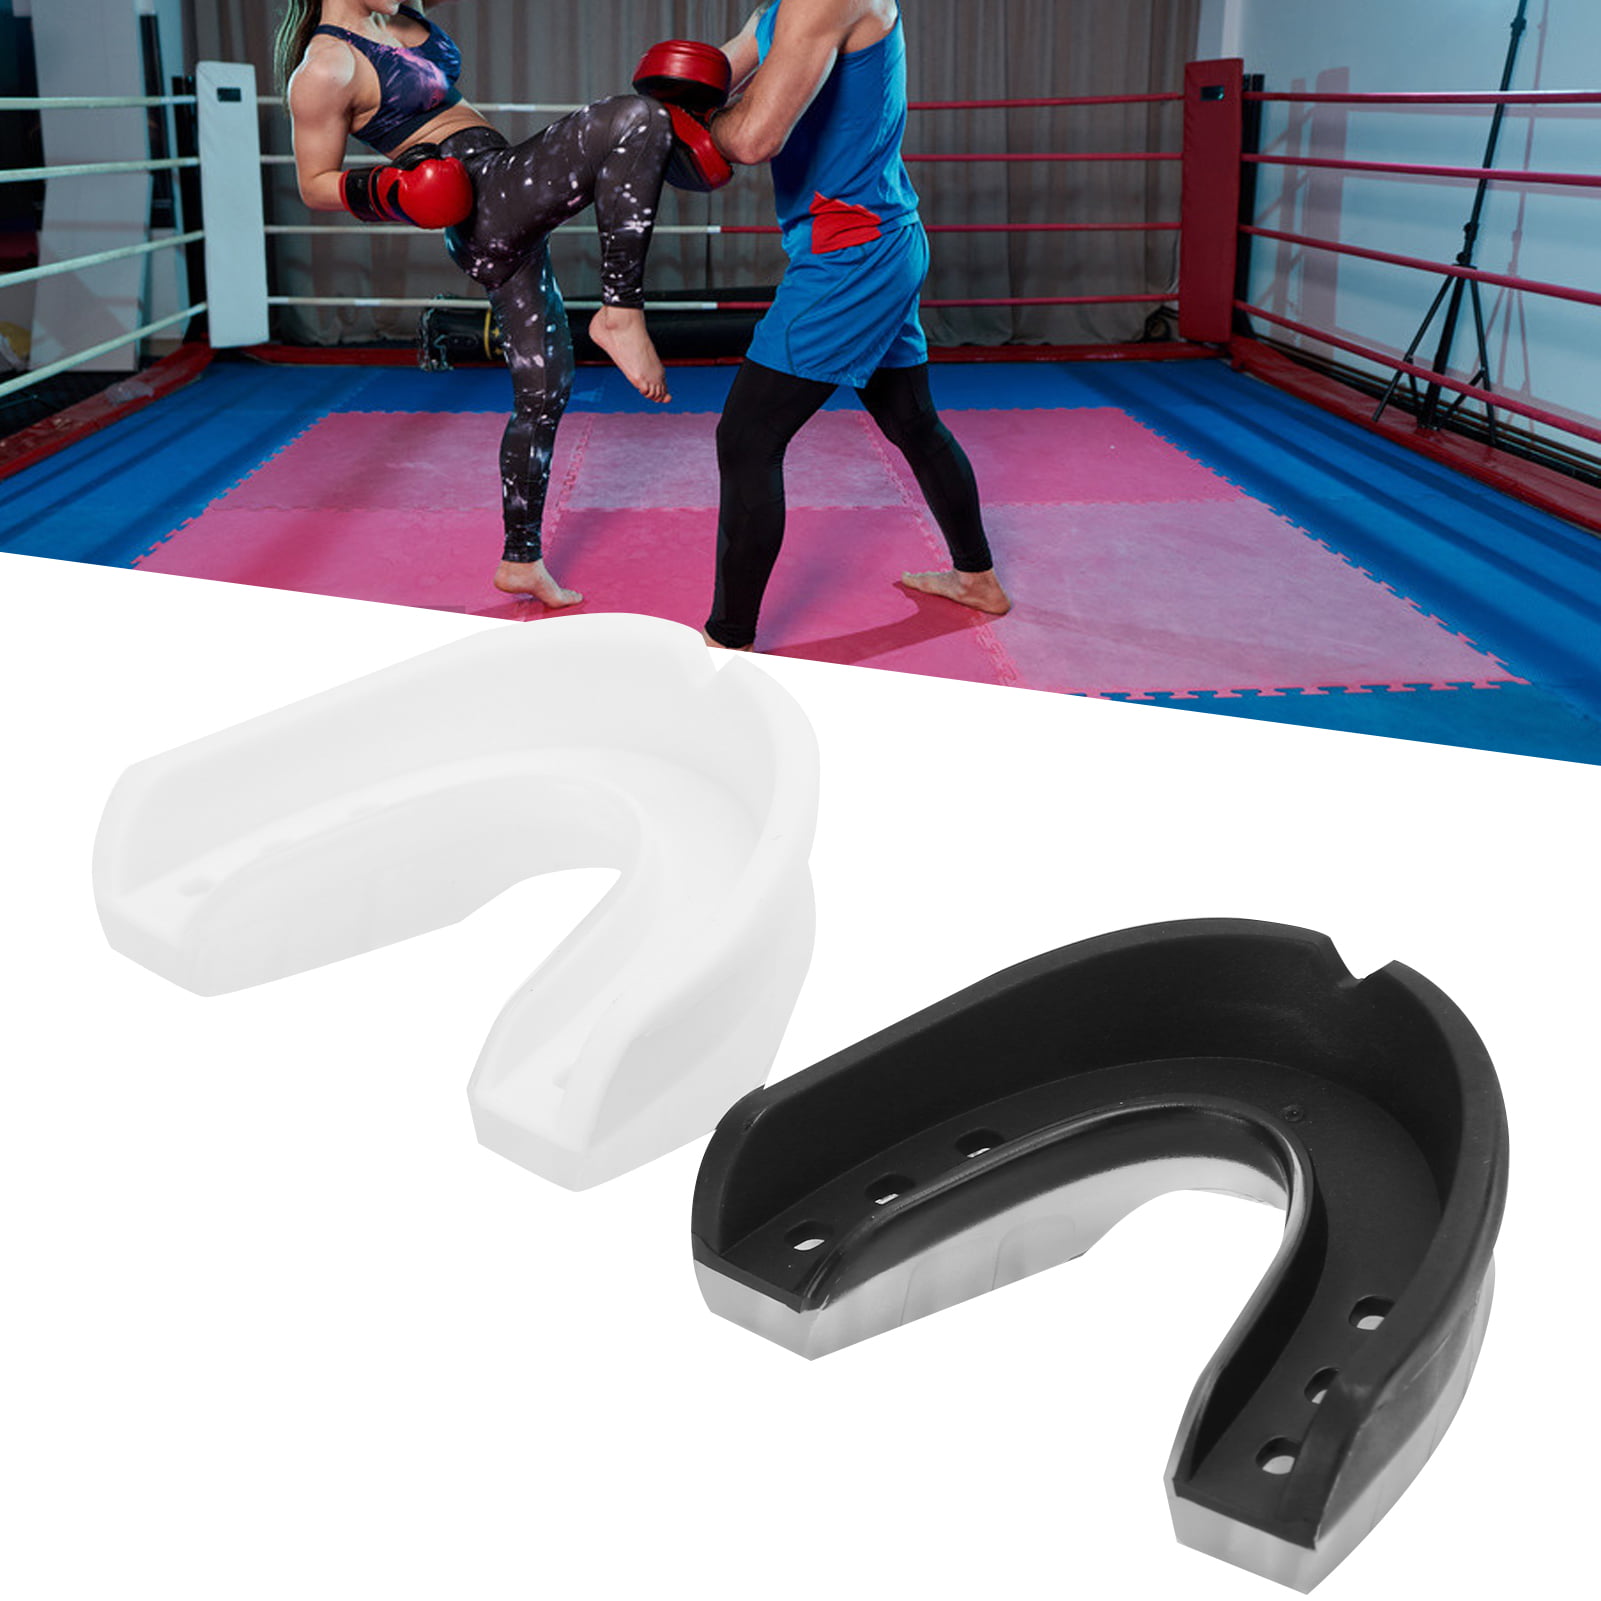 Gel Gum Mouth Guard Shield Case for Teeth Grinding Boxing MMA Sports Mouth Piece 